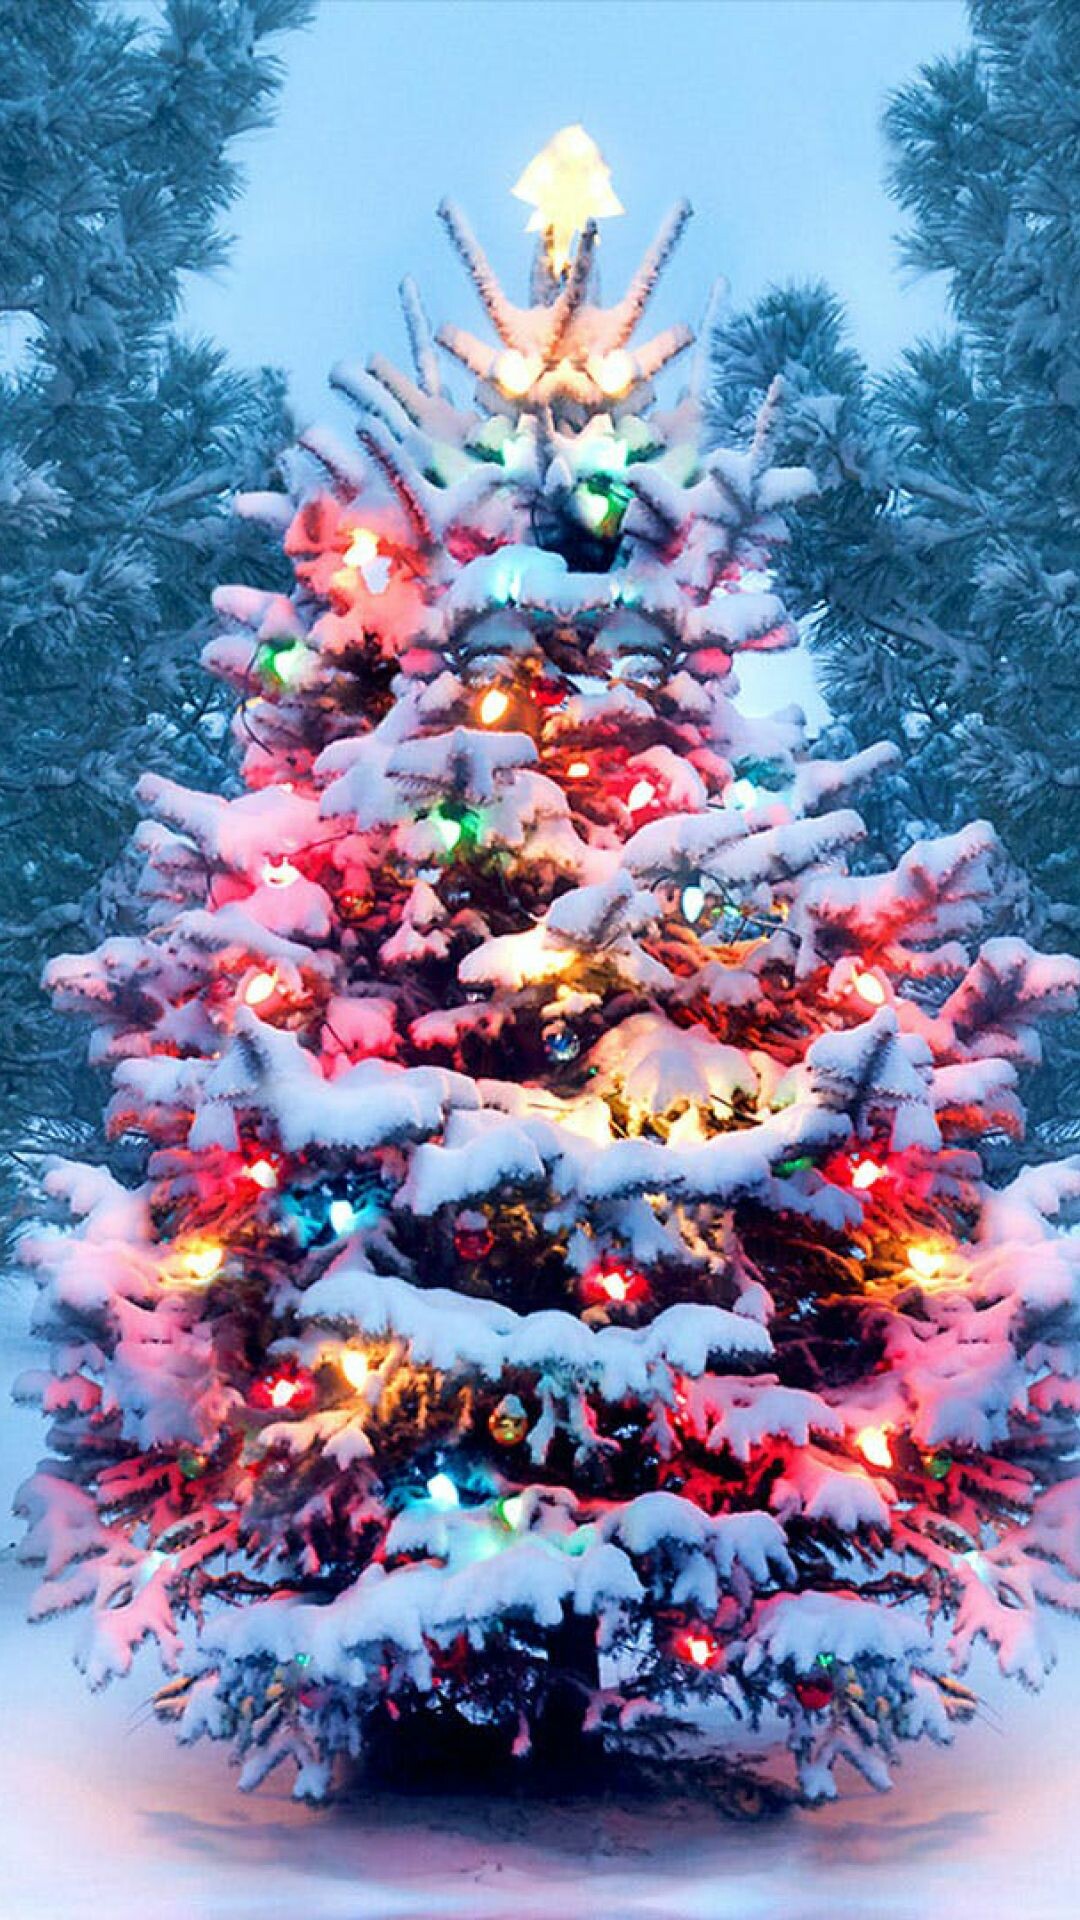 High-quality Christmas trees, Festive wallpapers, Holiday cheer, Top downloads, 1080x1920 Full HD Phone